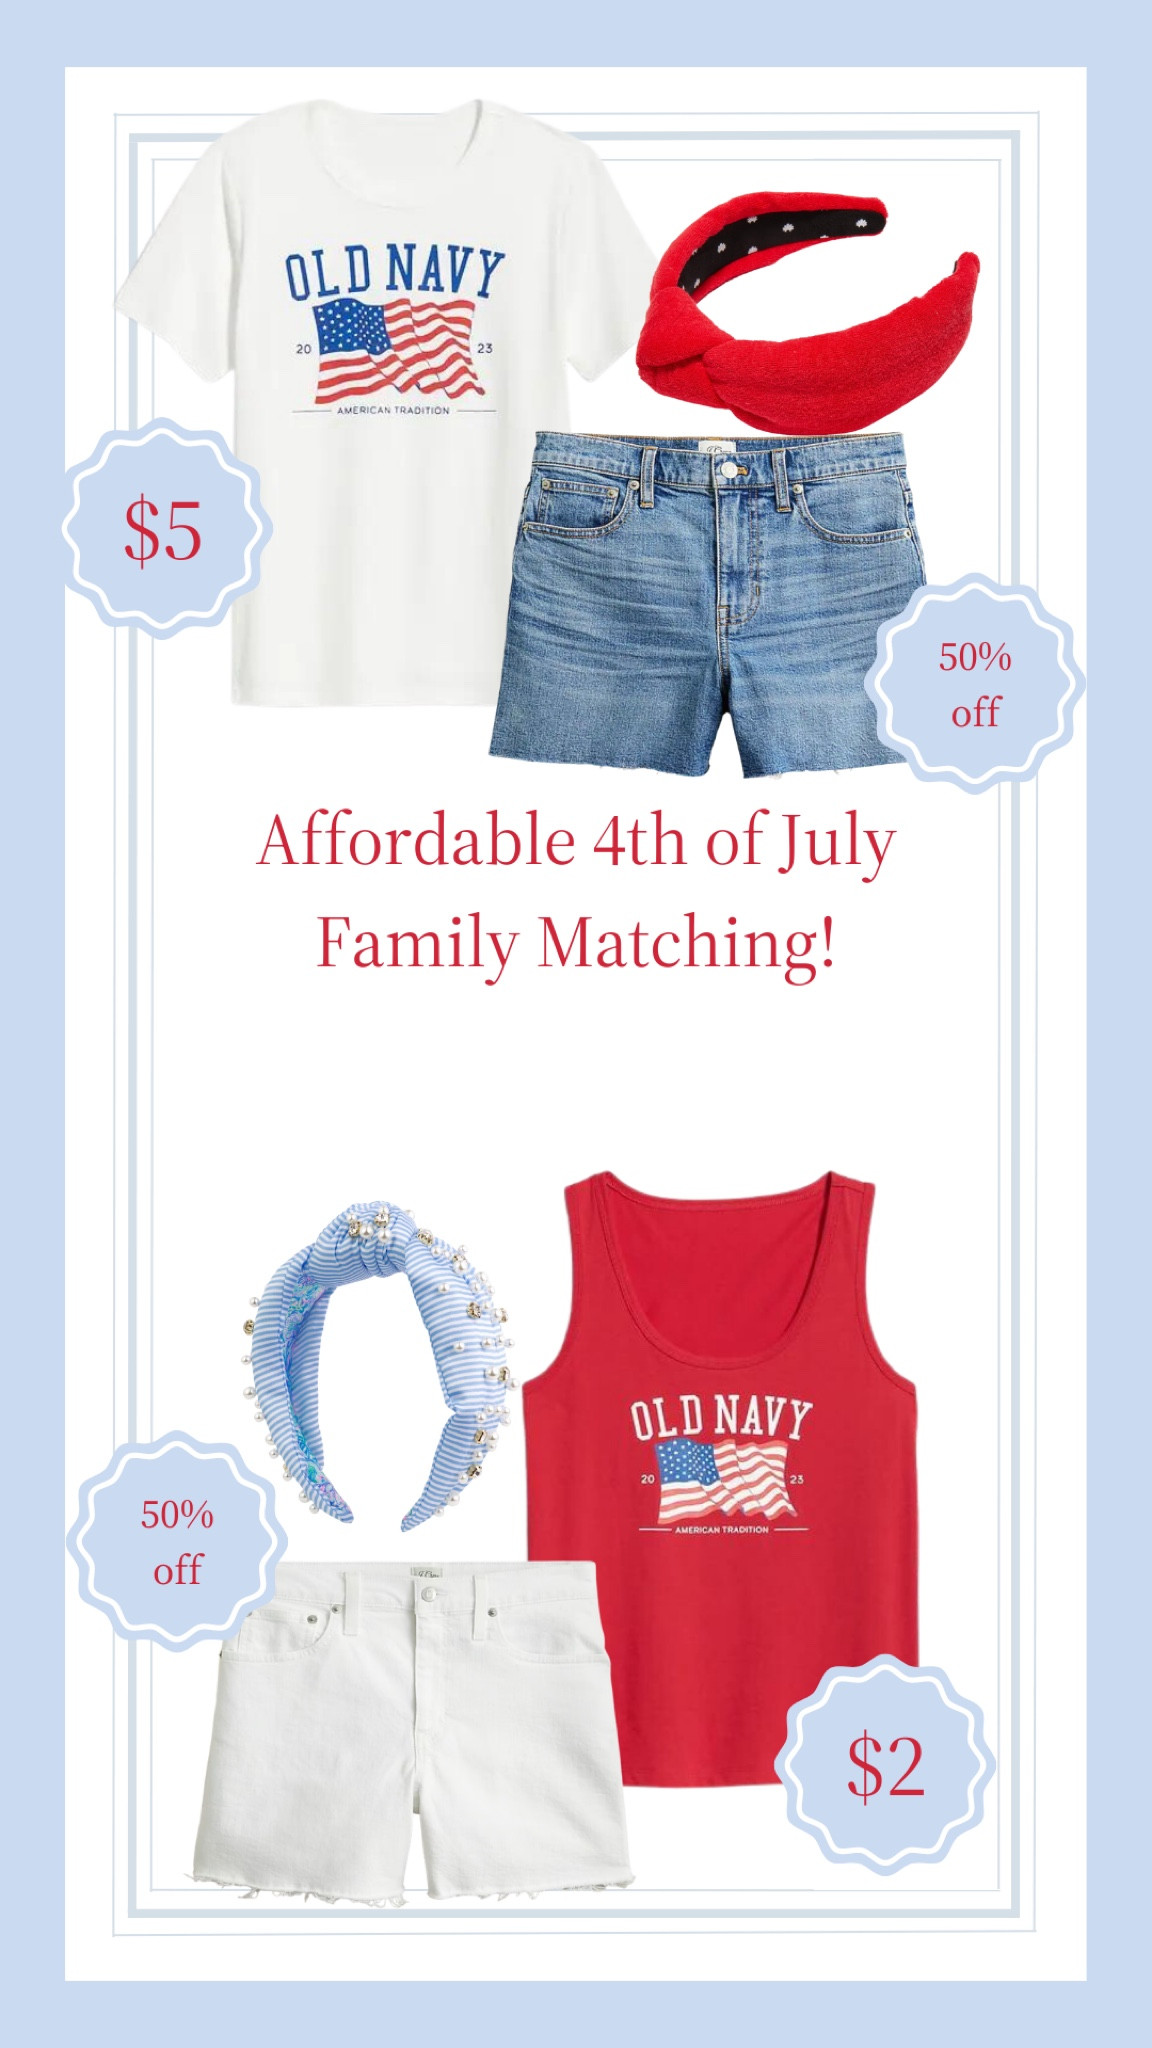 Old Navy: Flag Tees for the Family just $4!